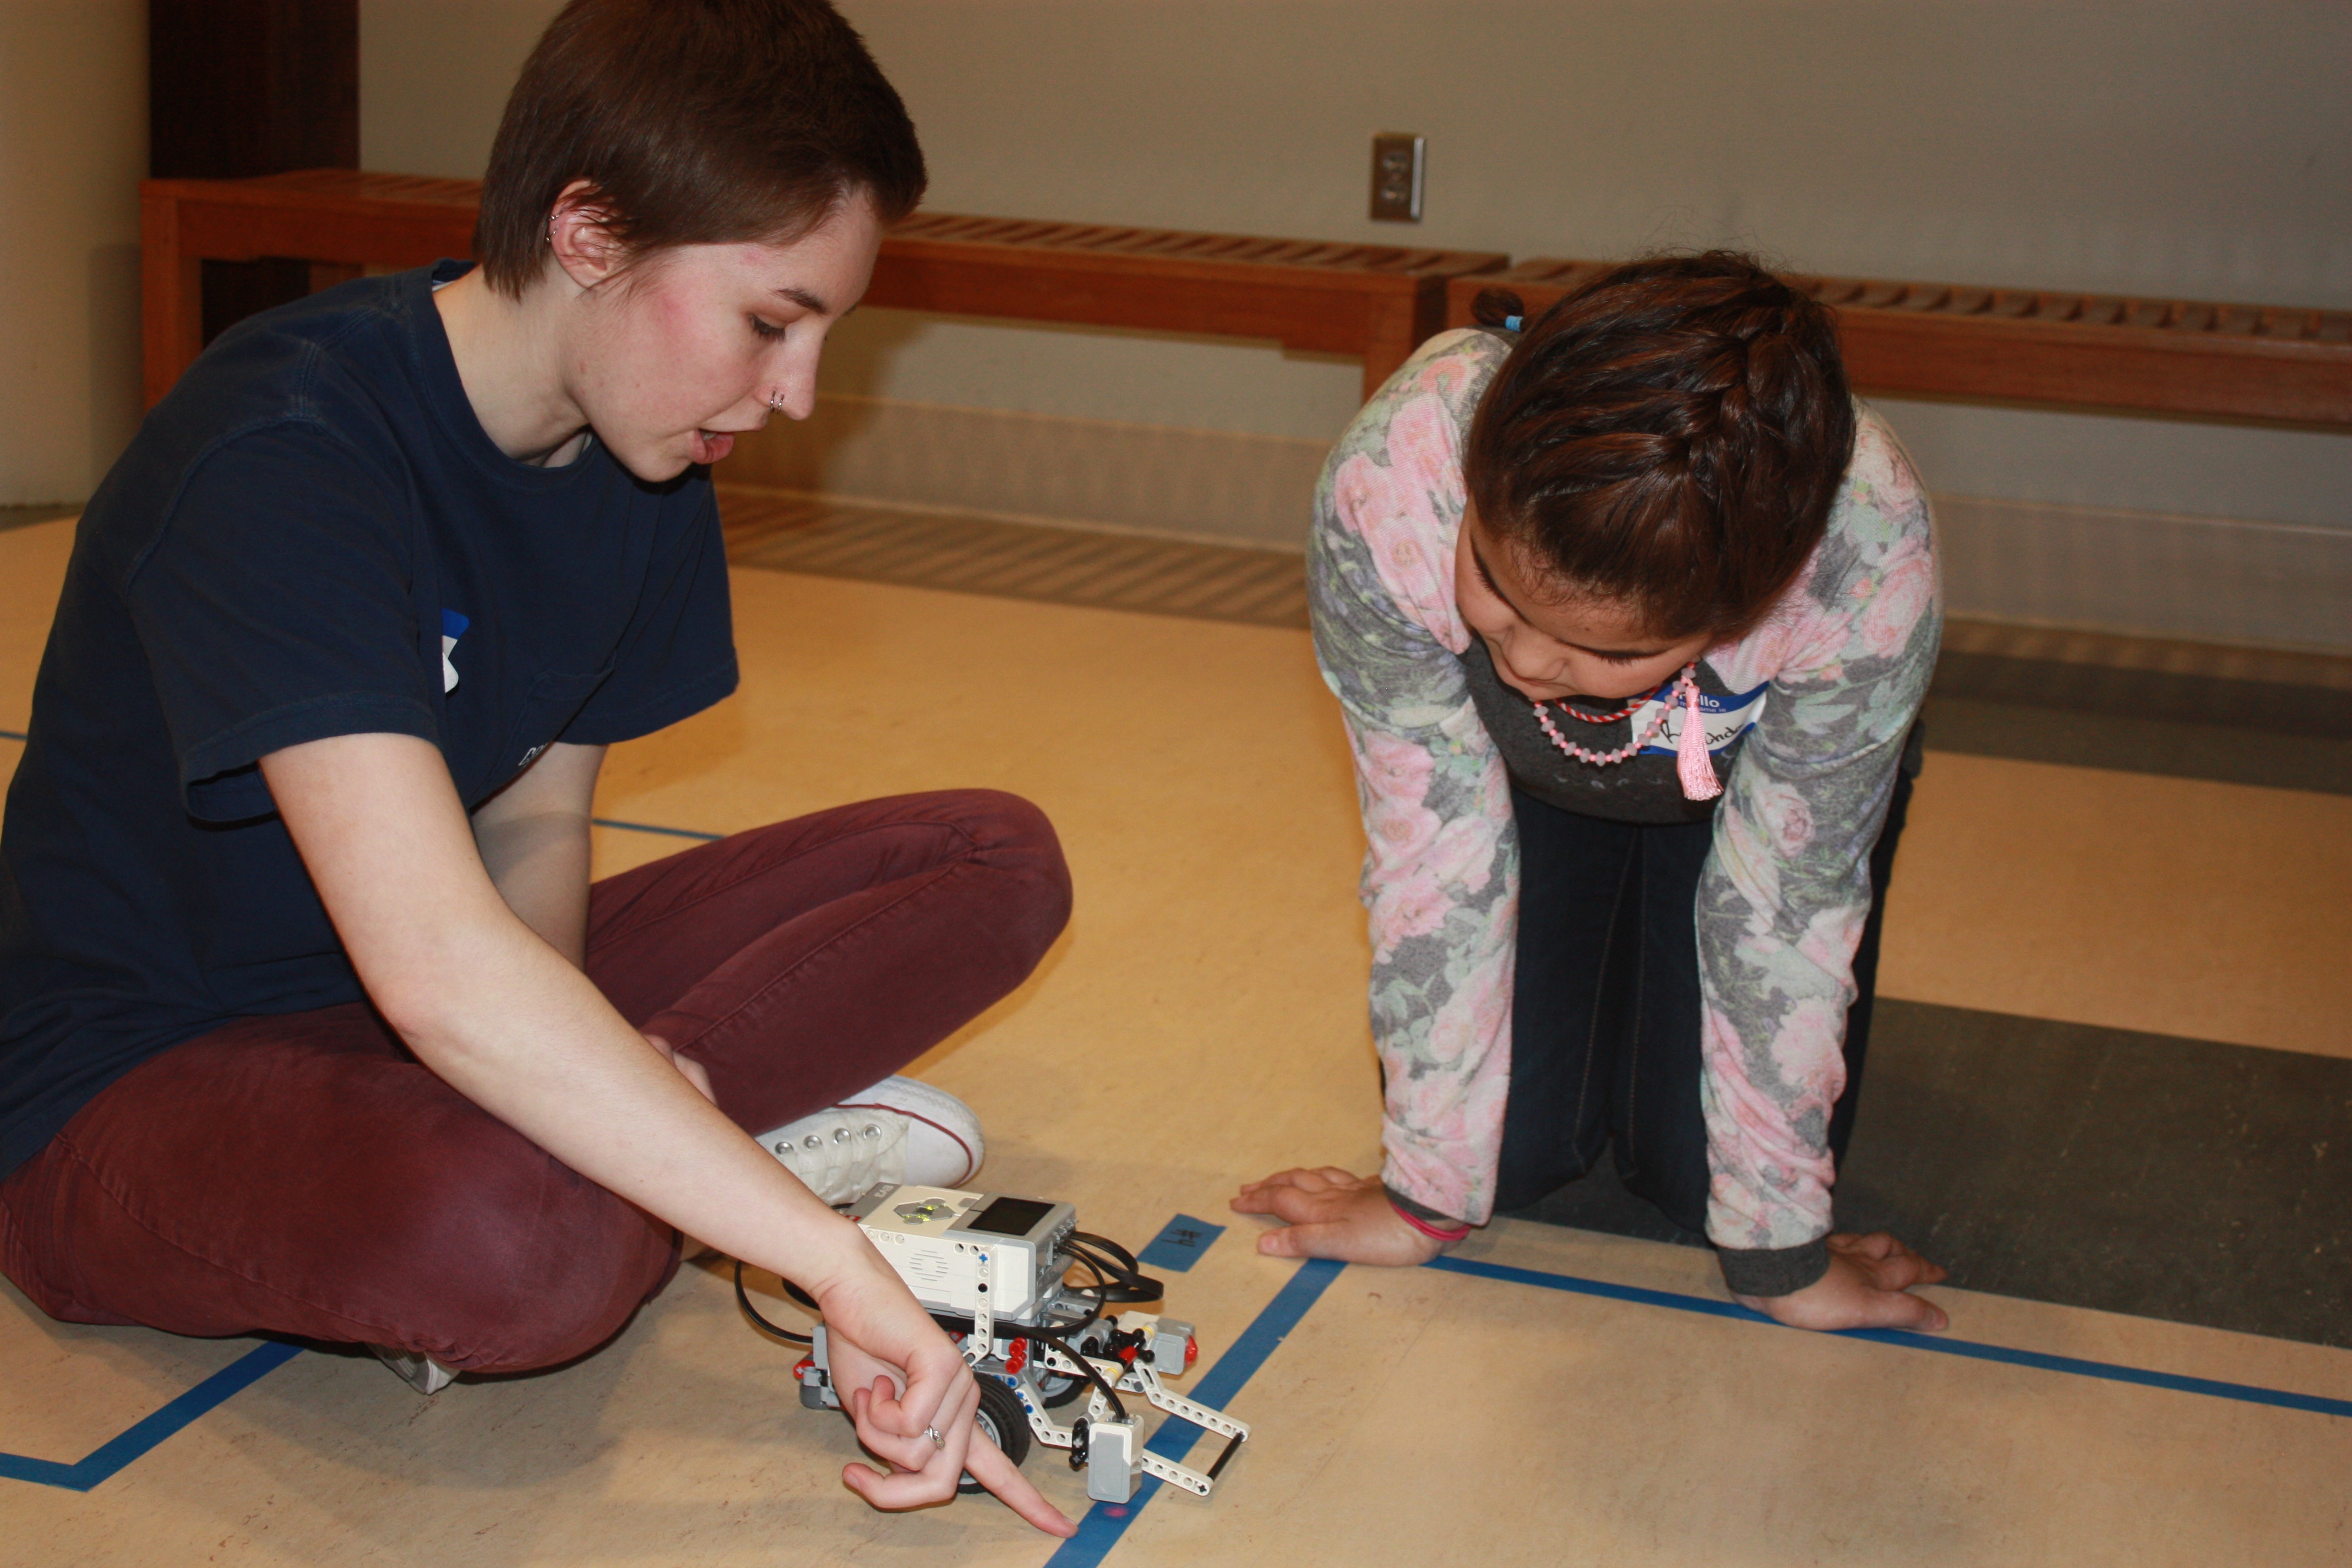 Computing for All member Allison Buckley helps a Girl Scout program a robot.